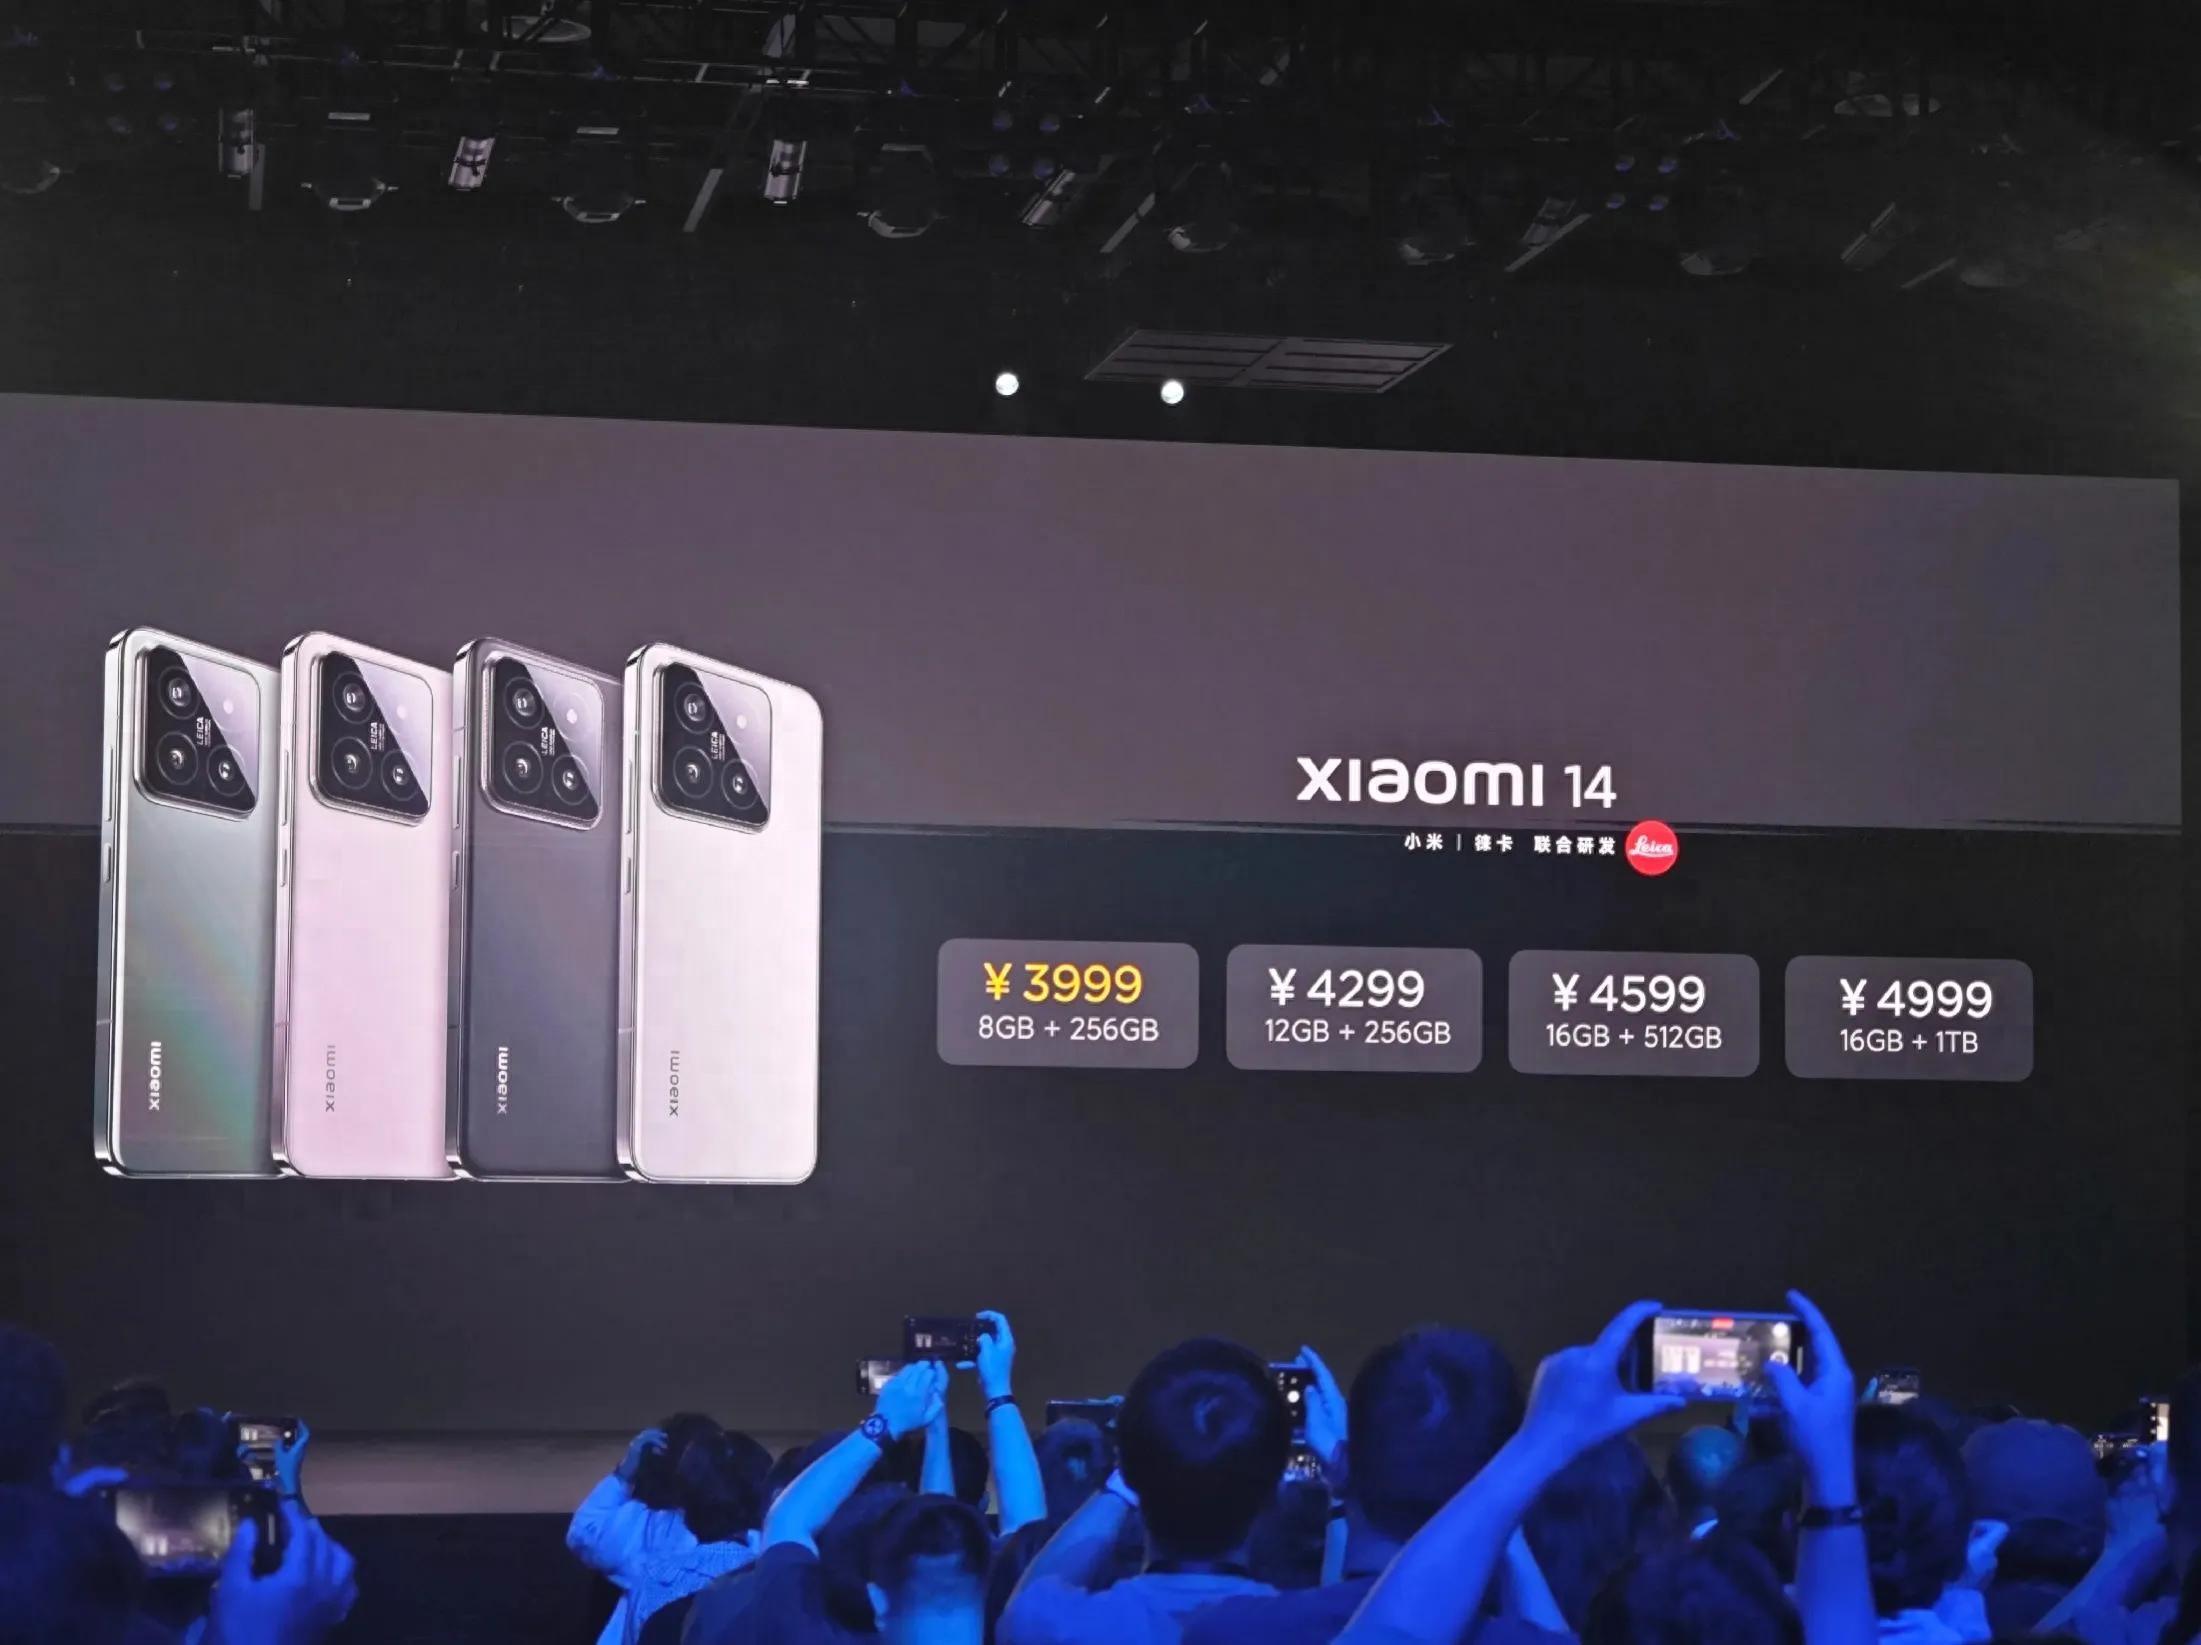 Xiaomi 14 Series officially released! Starting from 3999 yuan, there is a detailed summary of the differences between the Standard and Pro versions